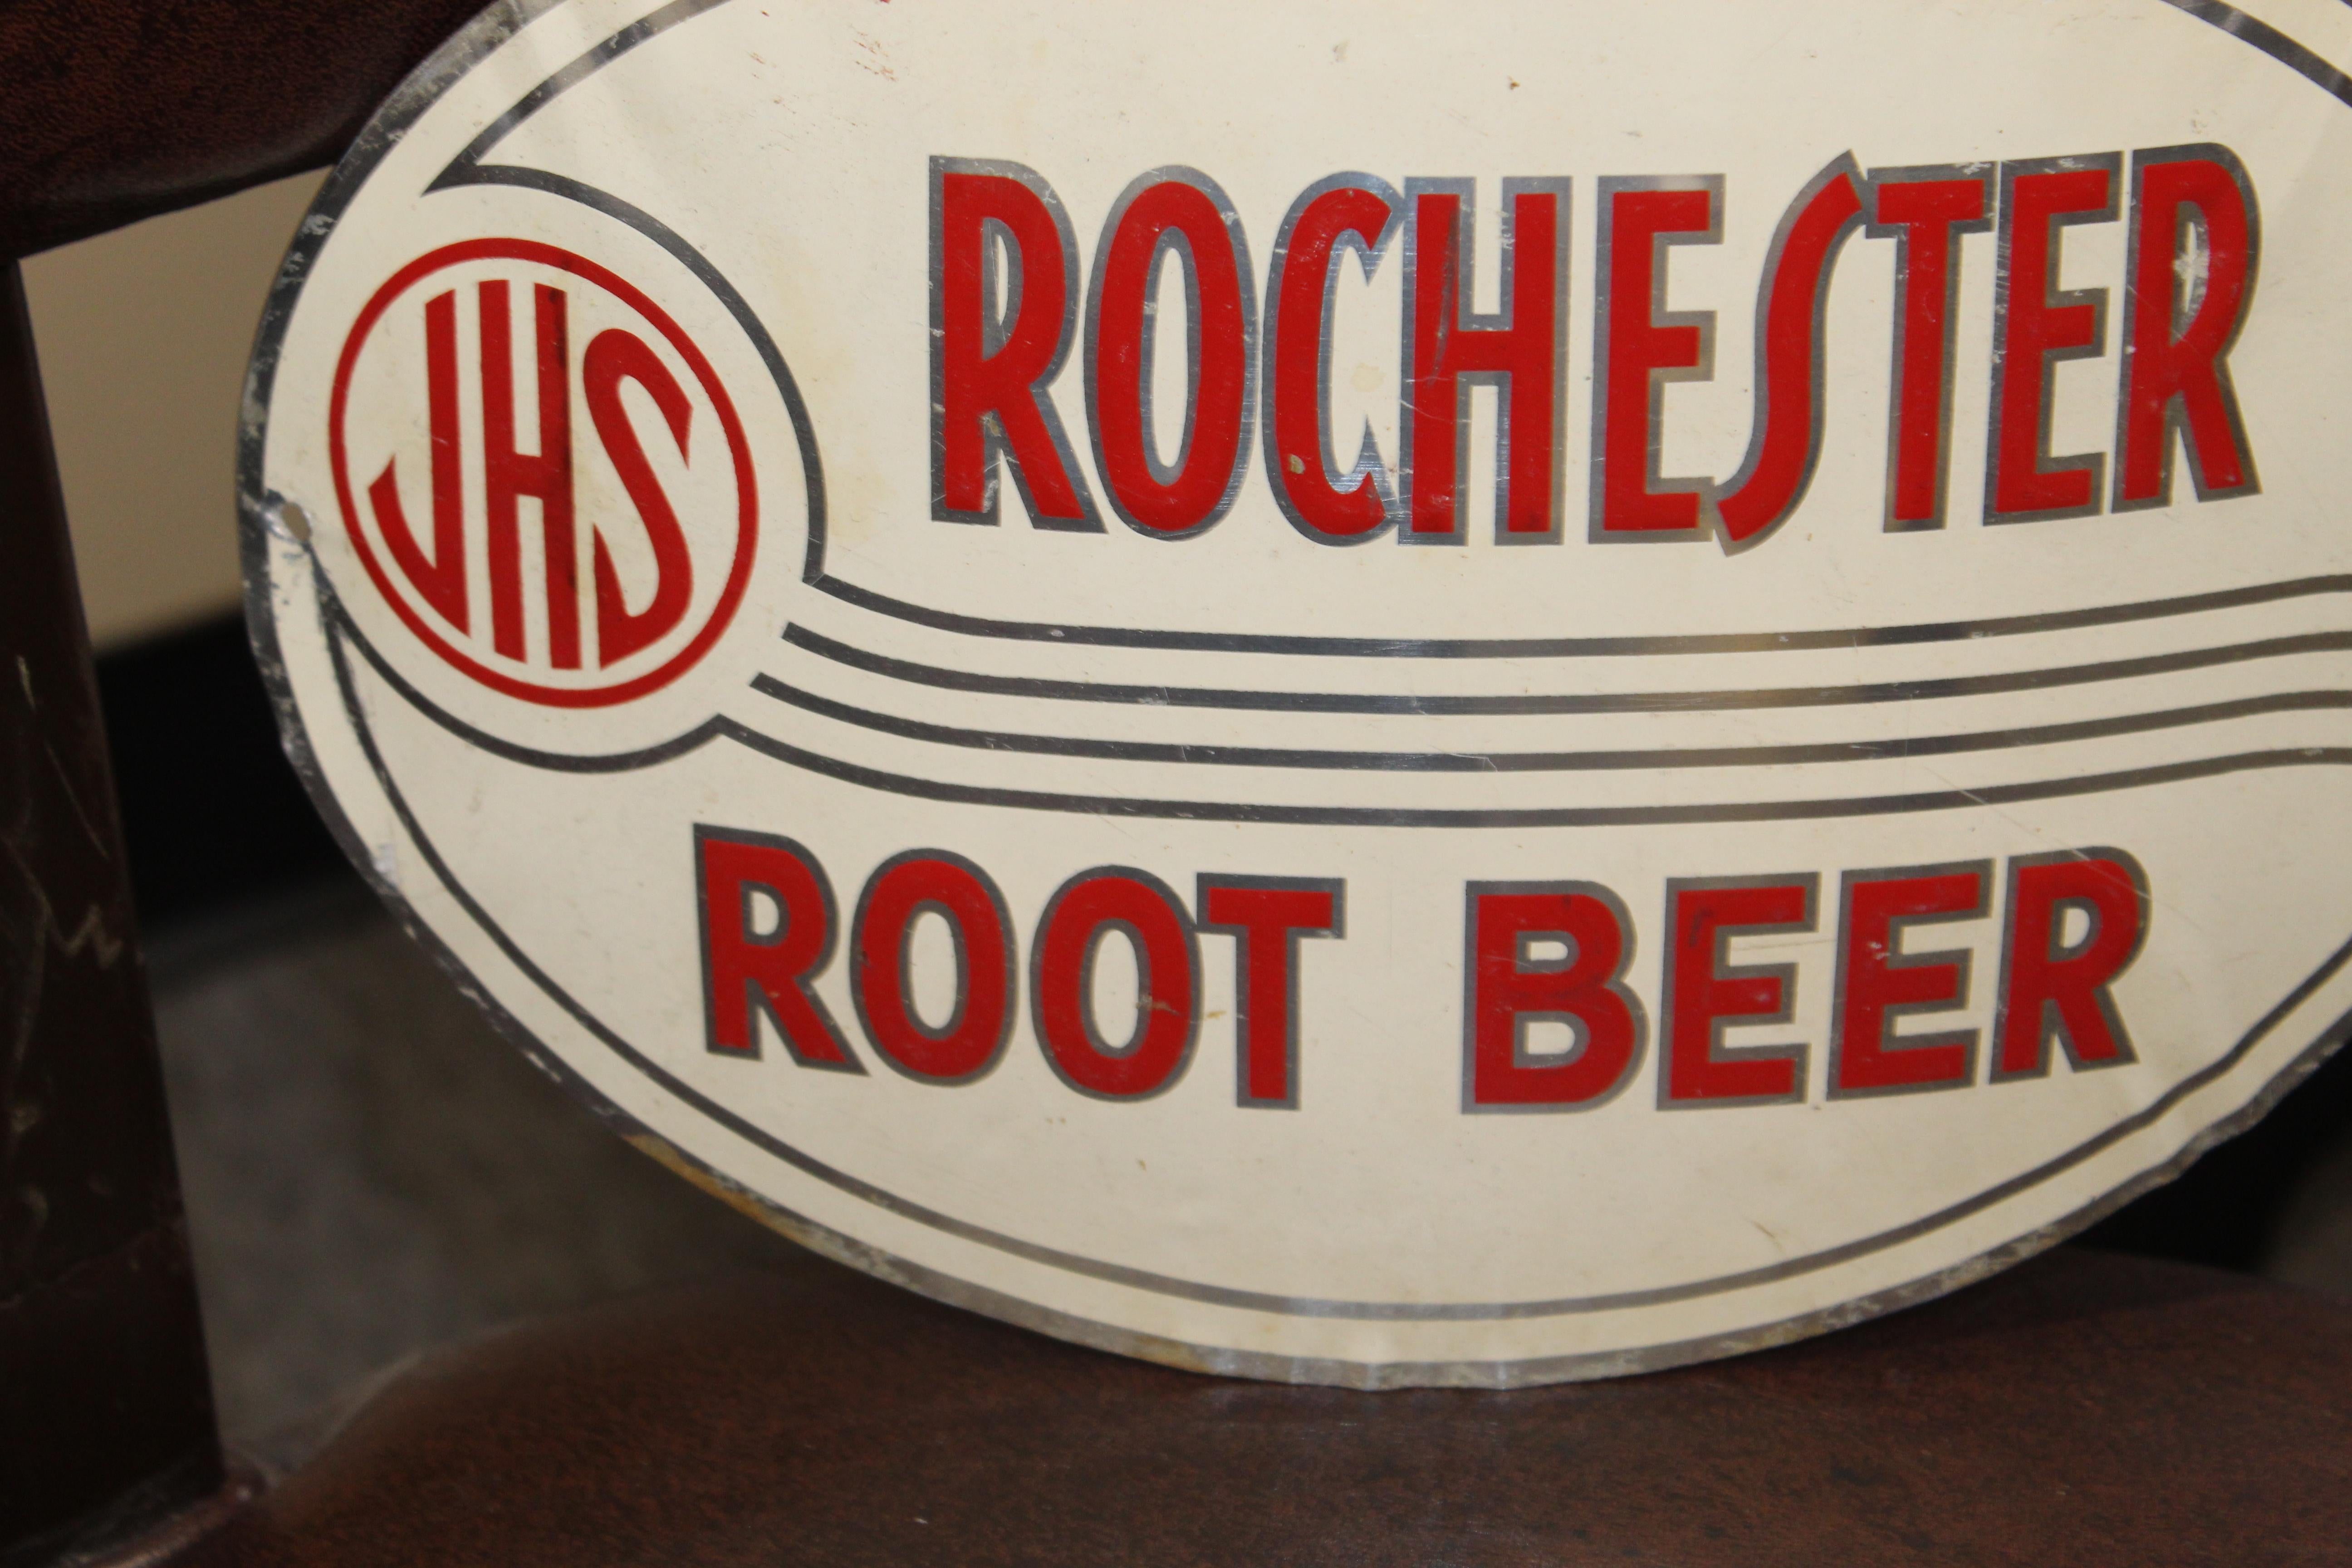 rochester root beer history